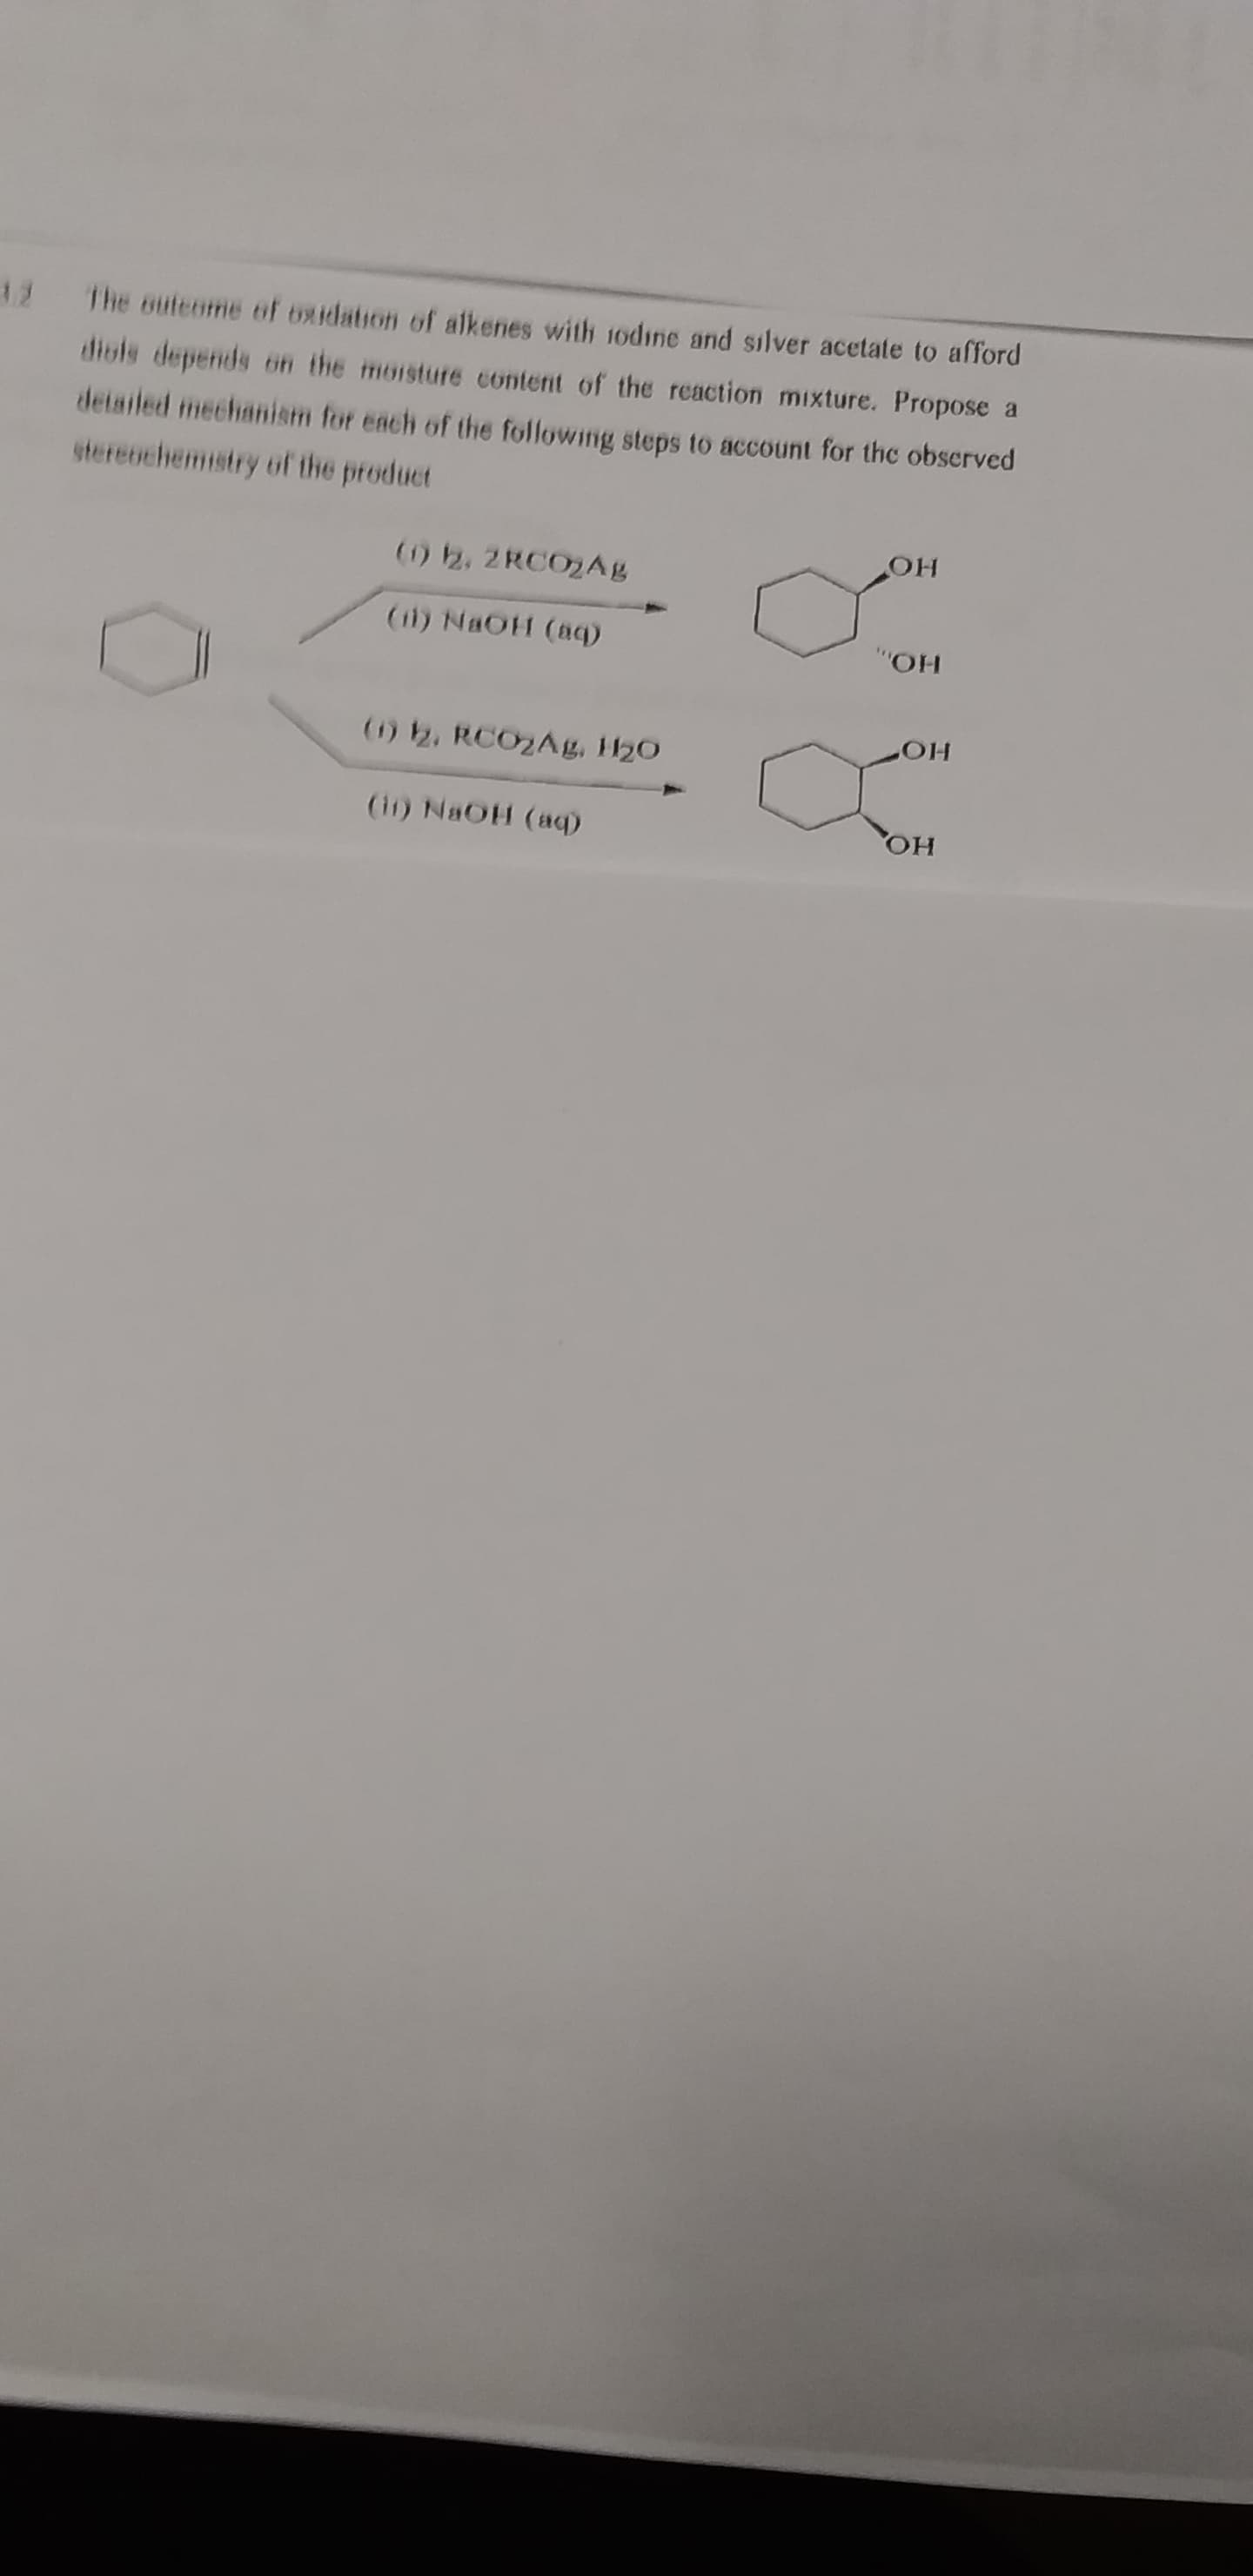 divls depends oin the moisture content of the reaction mixture. Propose a
detailed mechanism for ench of the following steps to account for the observed
The outeome of oxidation of alkenes with 1odine and silver acetate to afford
stereochemistry of the product
HO
() 2, 2 RCO2Ag
(i1) NaOH (aq)
HO
HO
() 2, RCO2Ag, H20
(11) NaOH (aq)
HO
